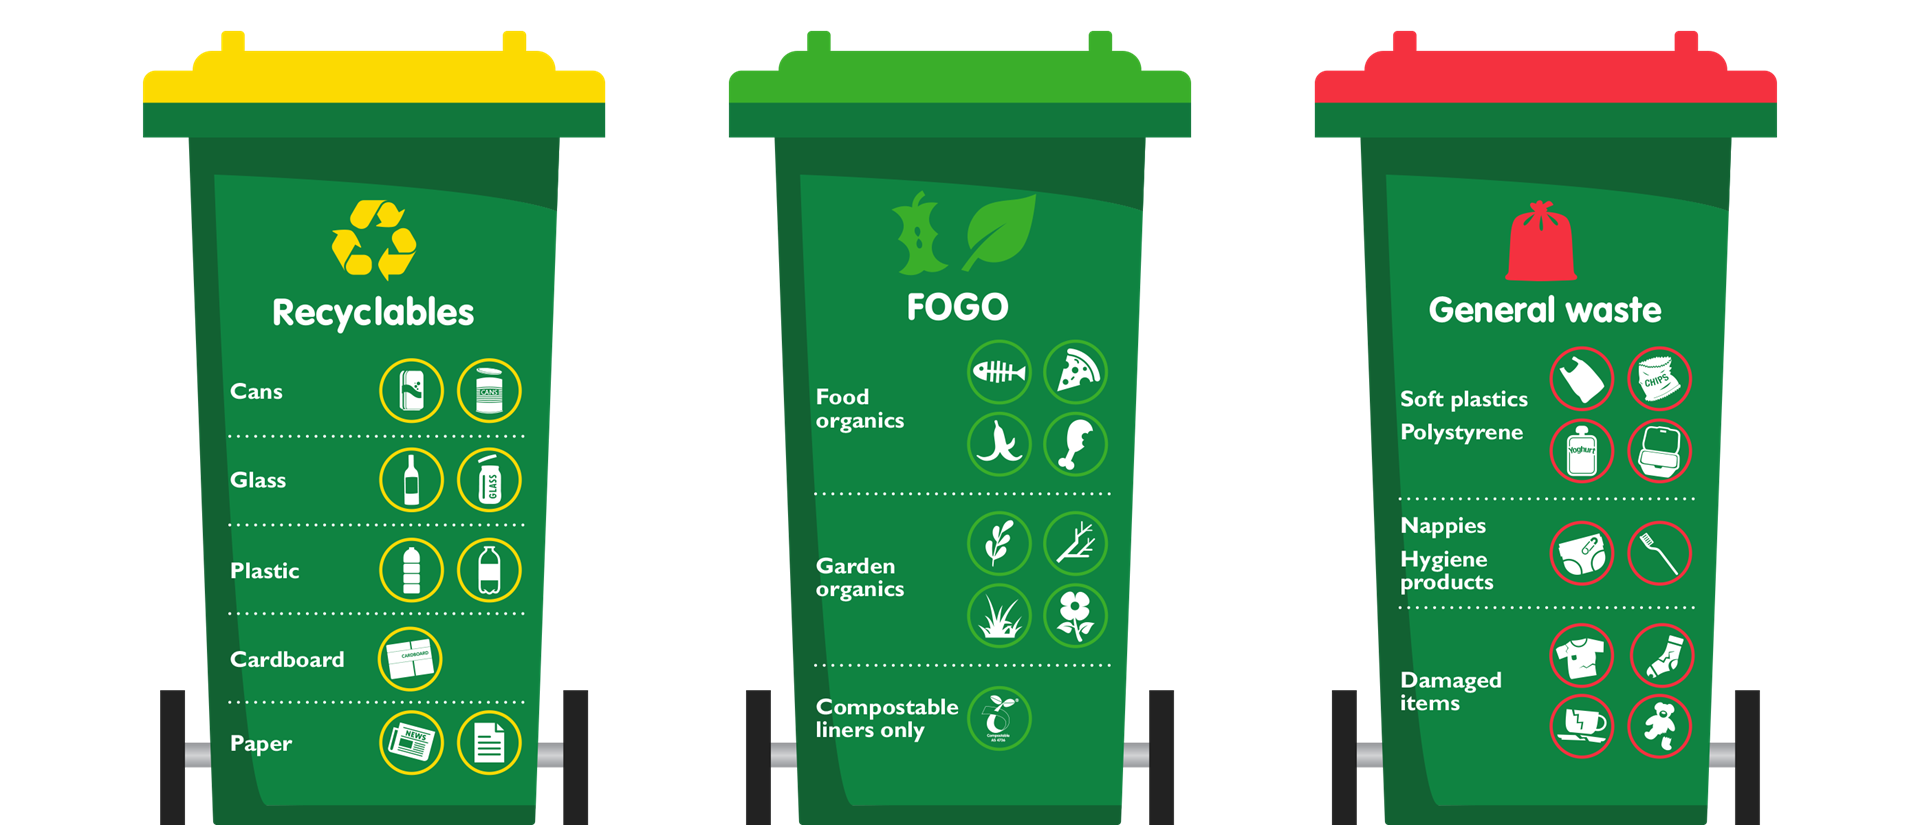 An image of a Recycling bin, FOGO bin and General Waste Bin with pictures of their contents